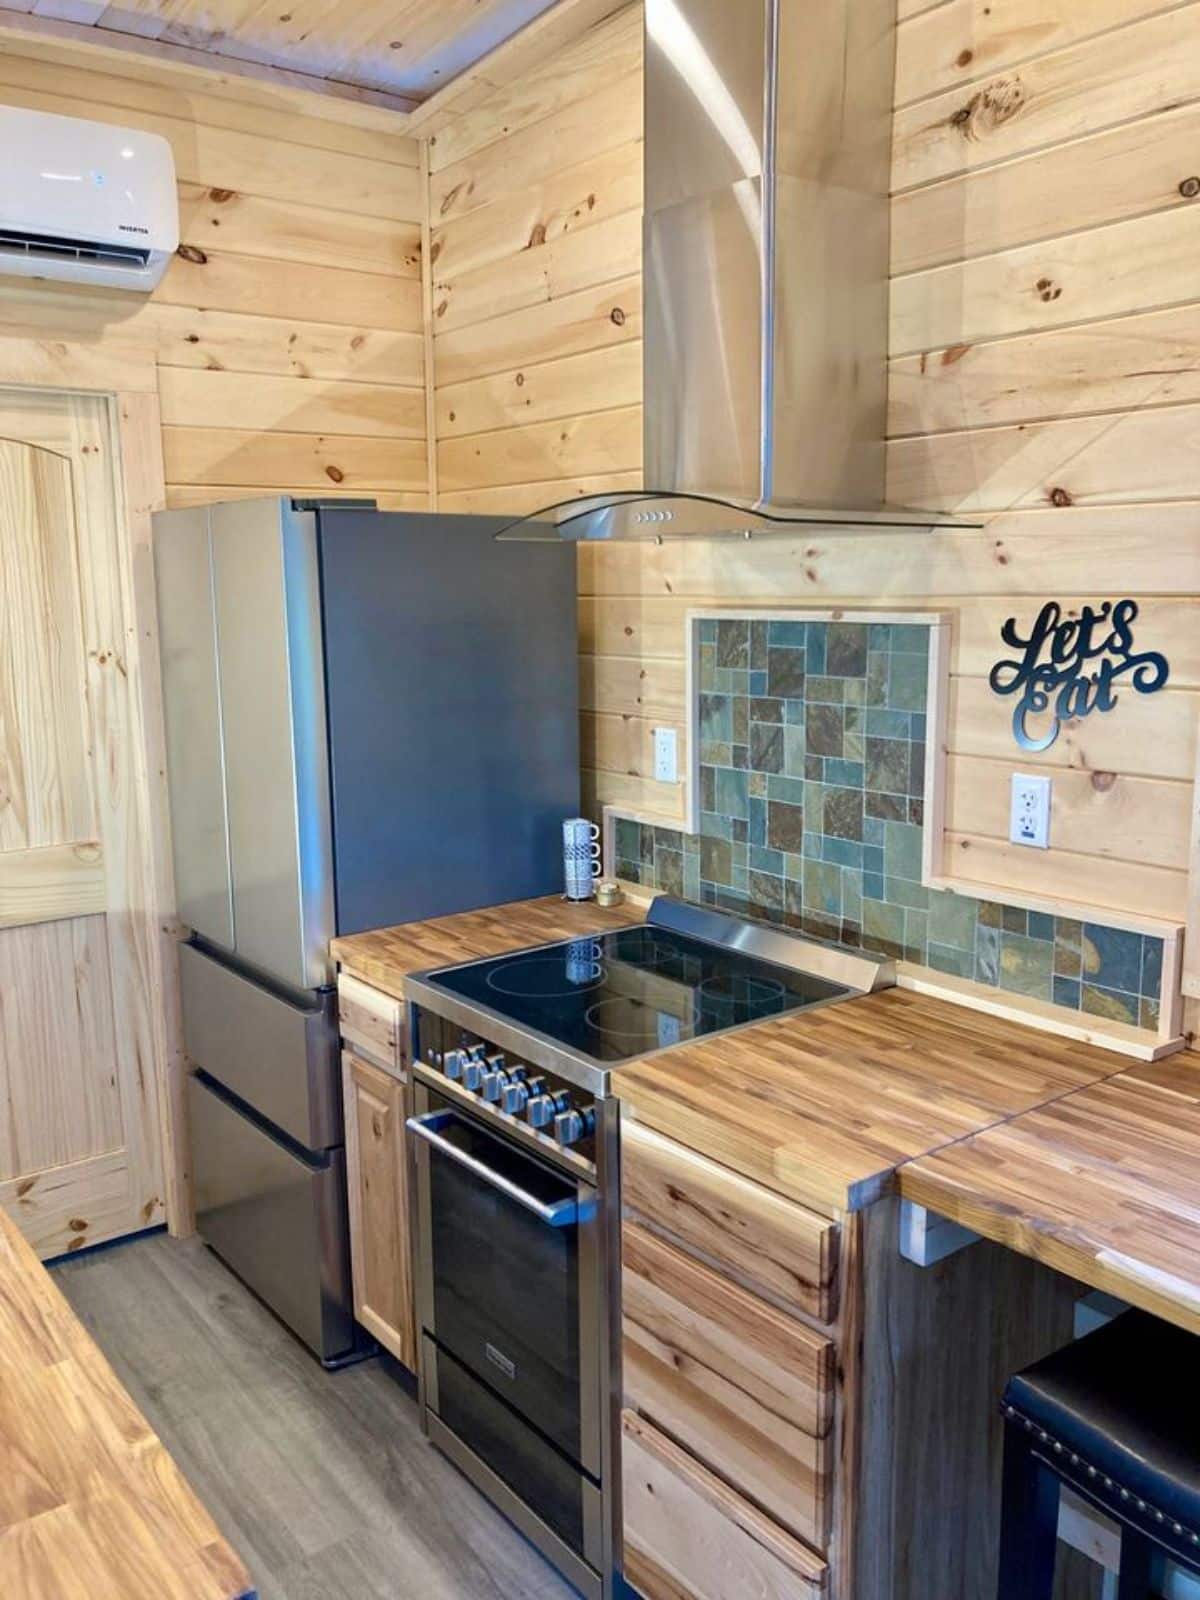 Well organized Kitchen area of 28’ Tiny Home